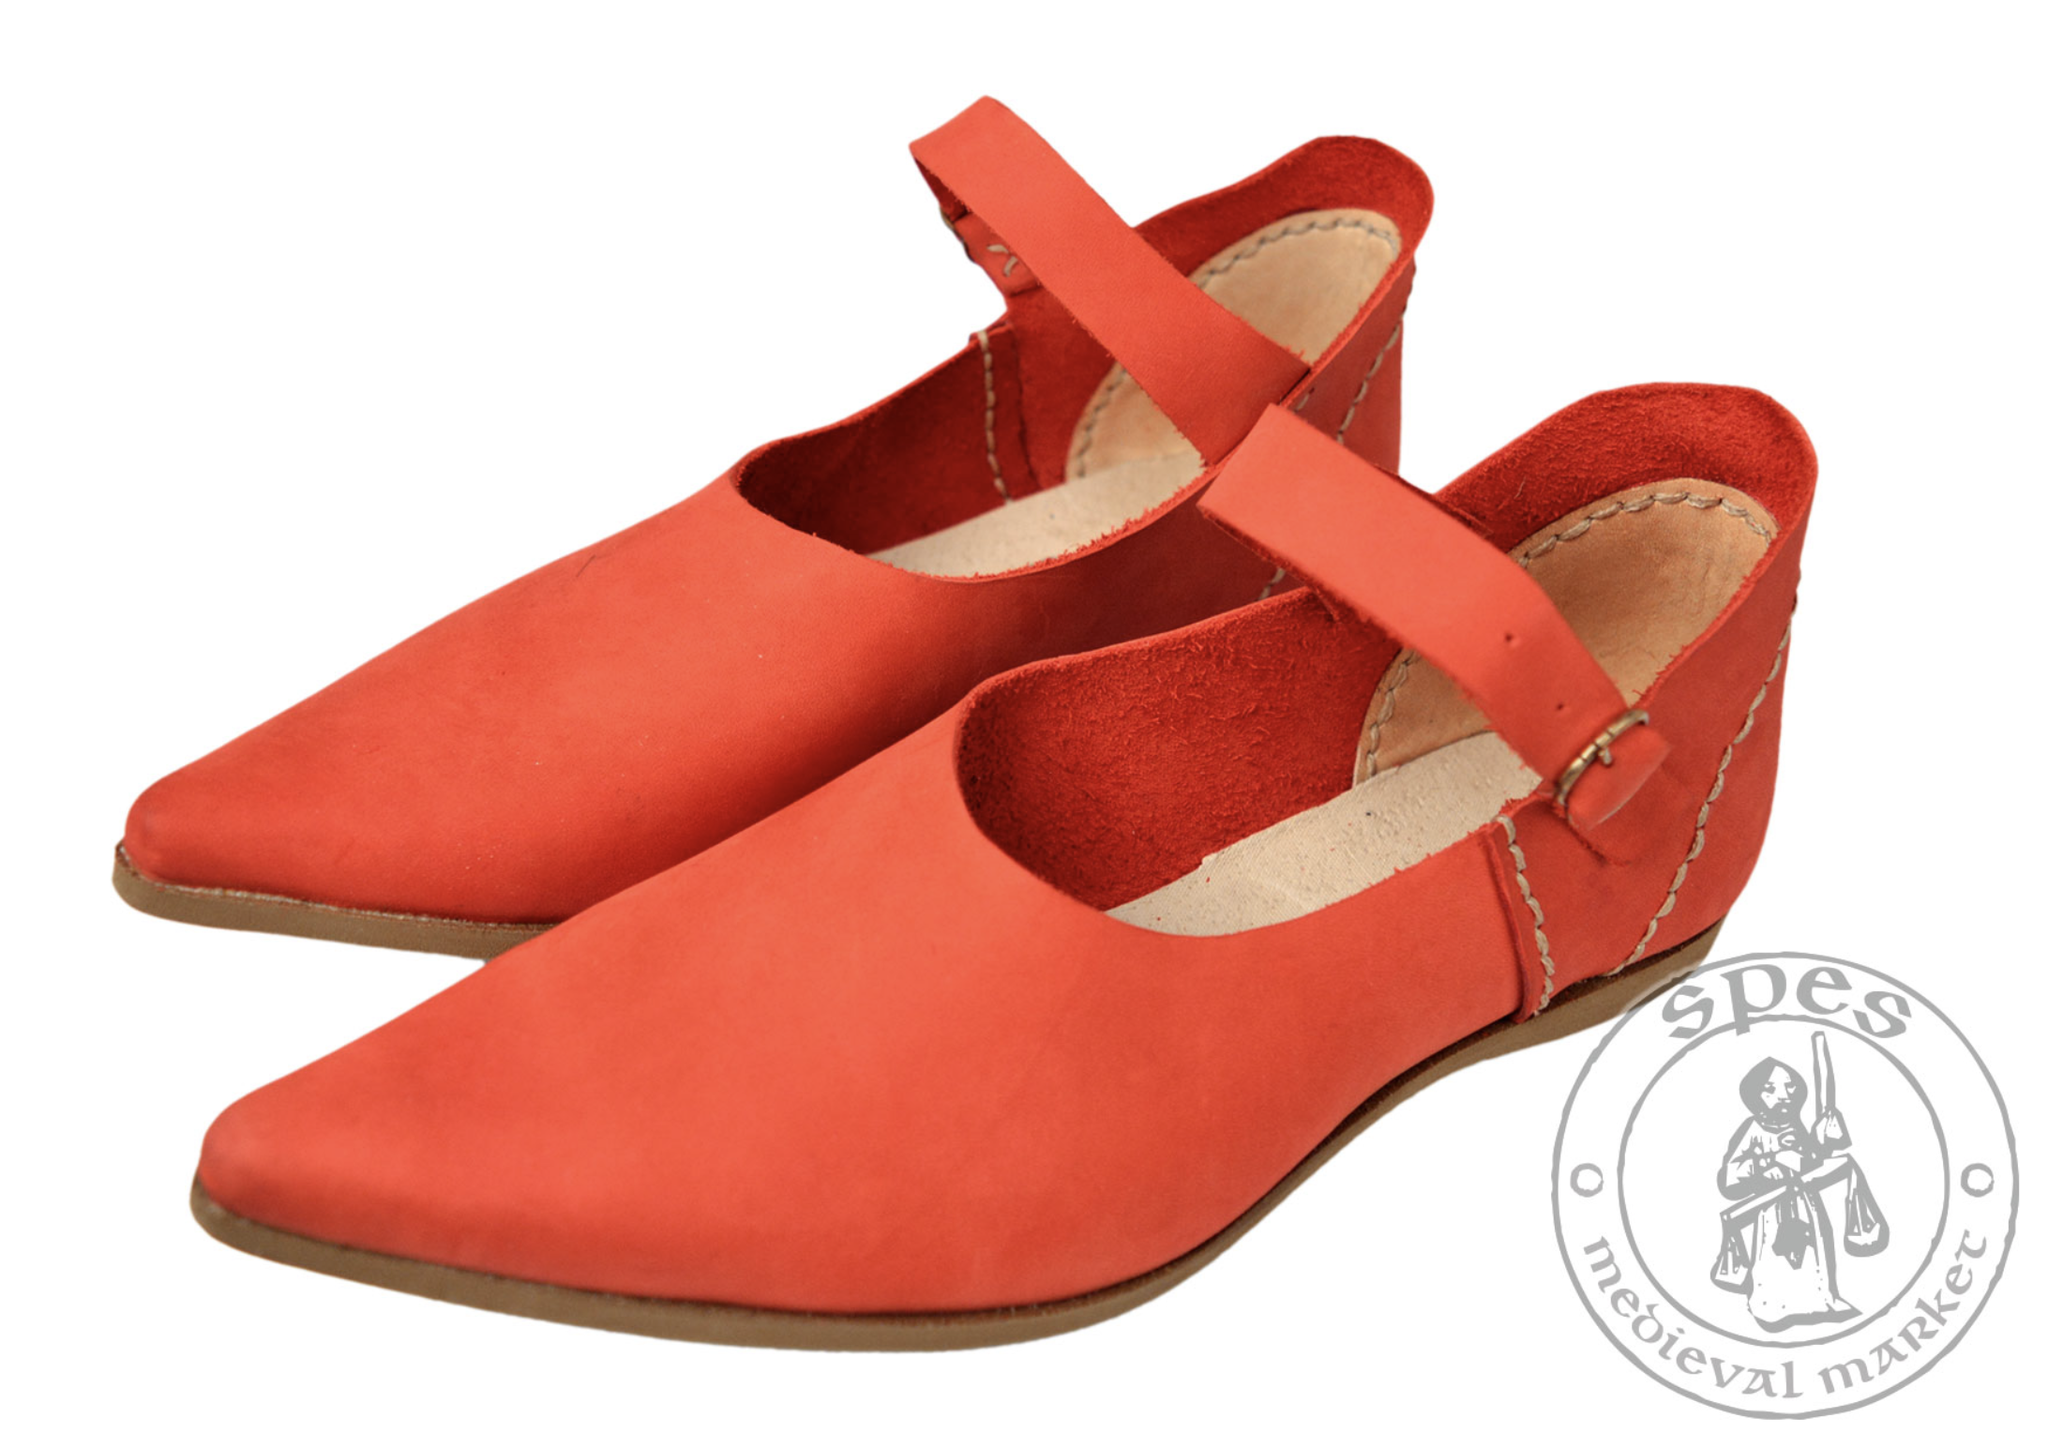 Chaussures Dame : KSS1403 - 120 €